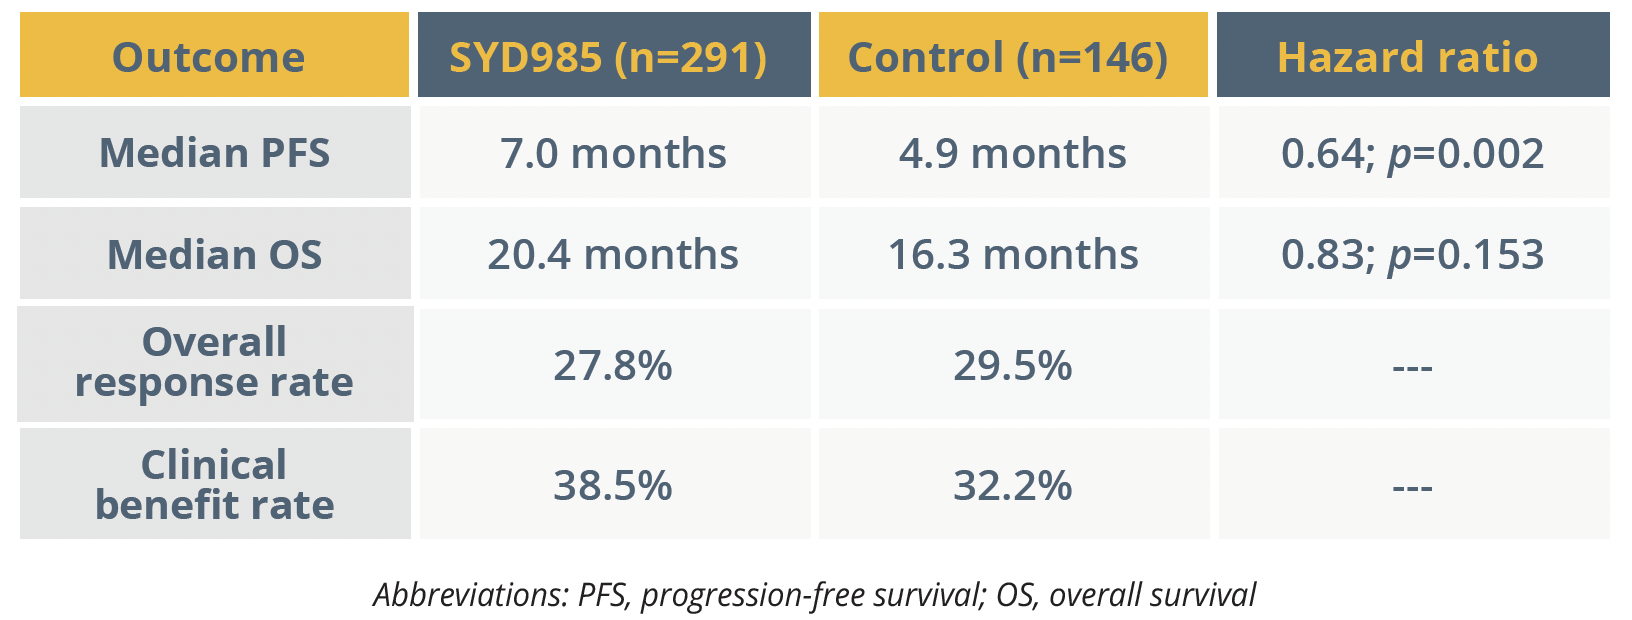 Improved outcomes with SYD985 versus control in patients with HER2-positive advanced breast cancer